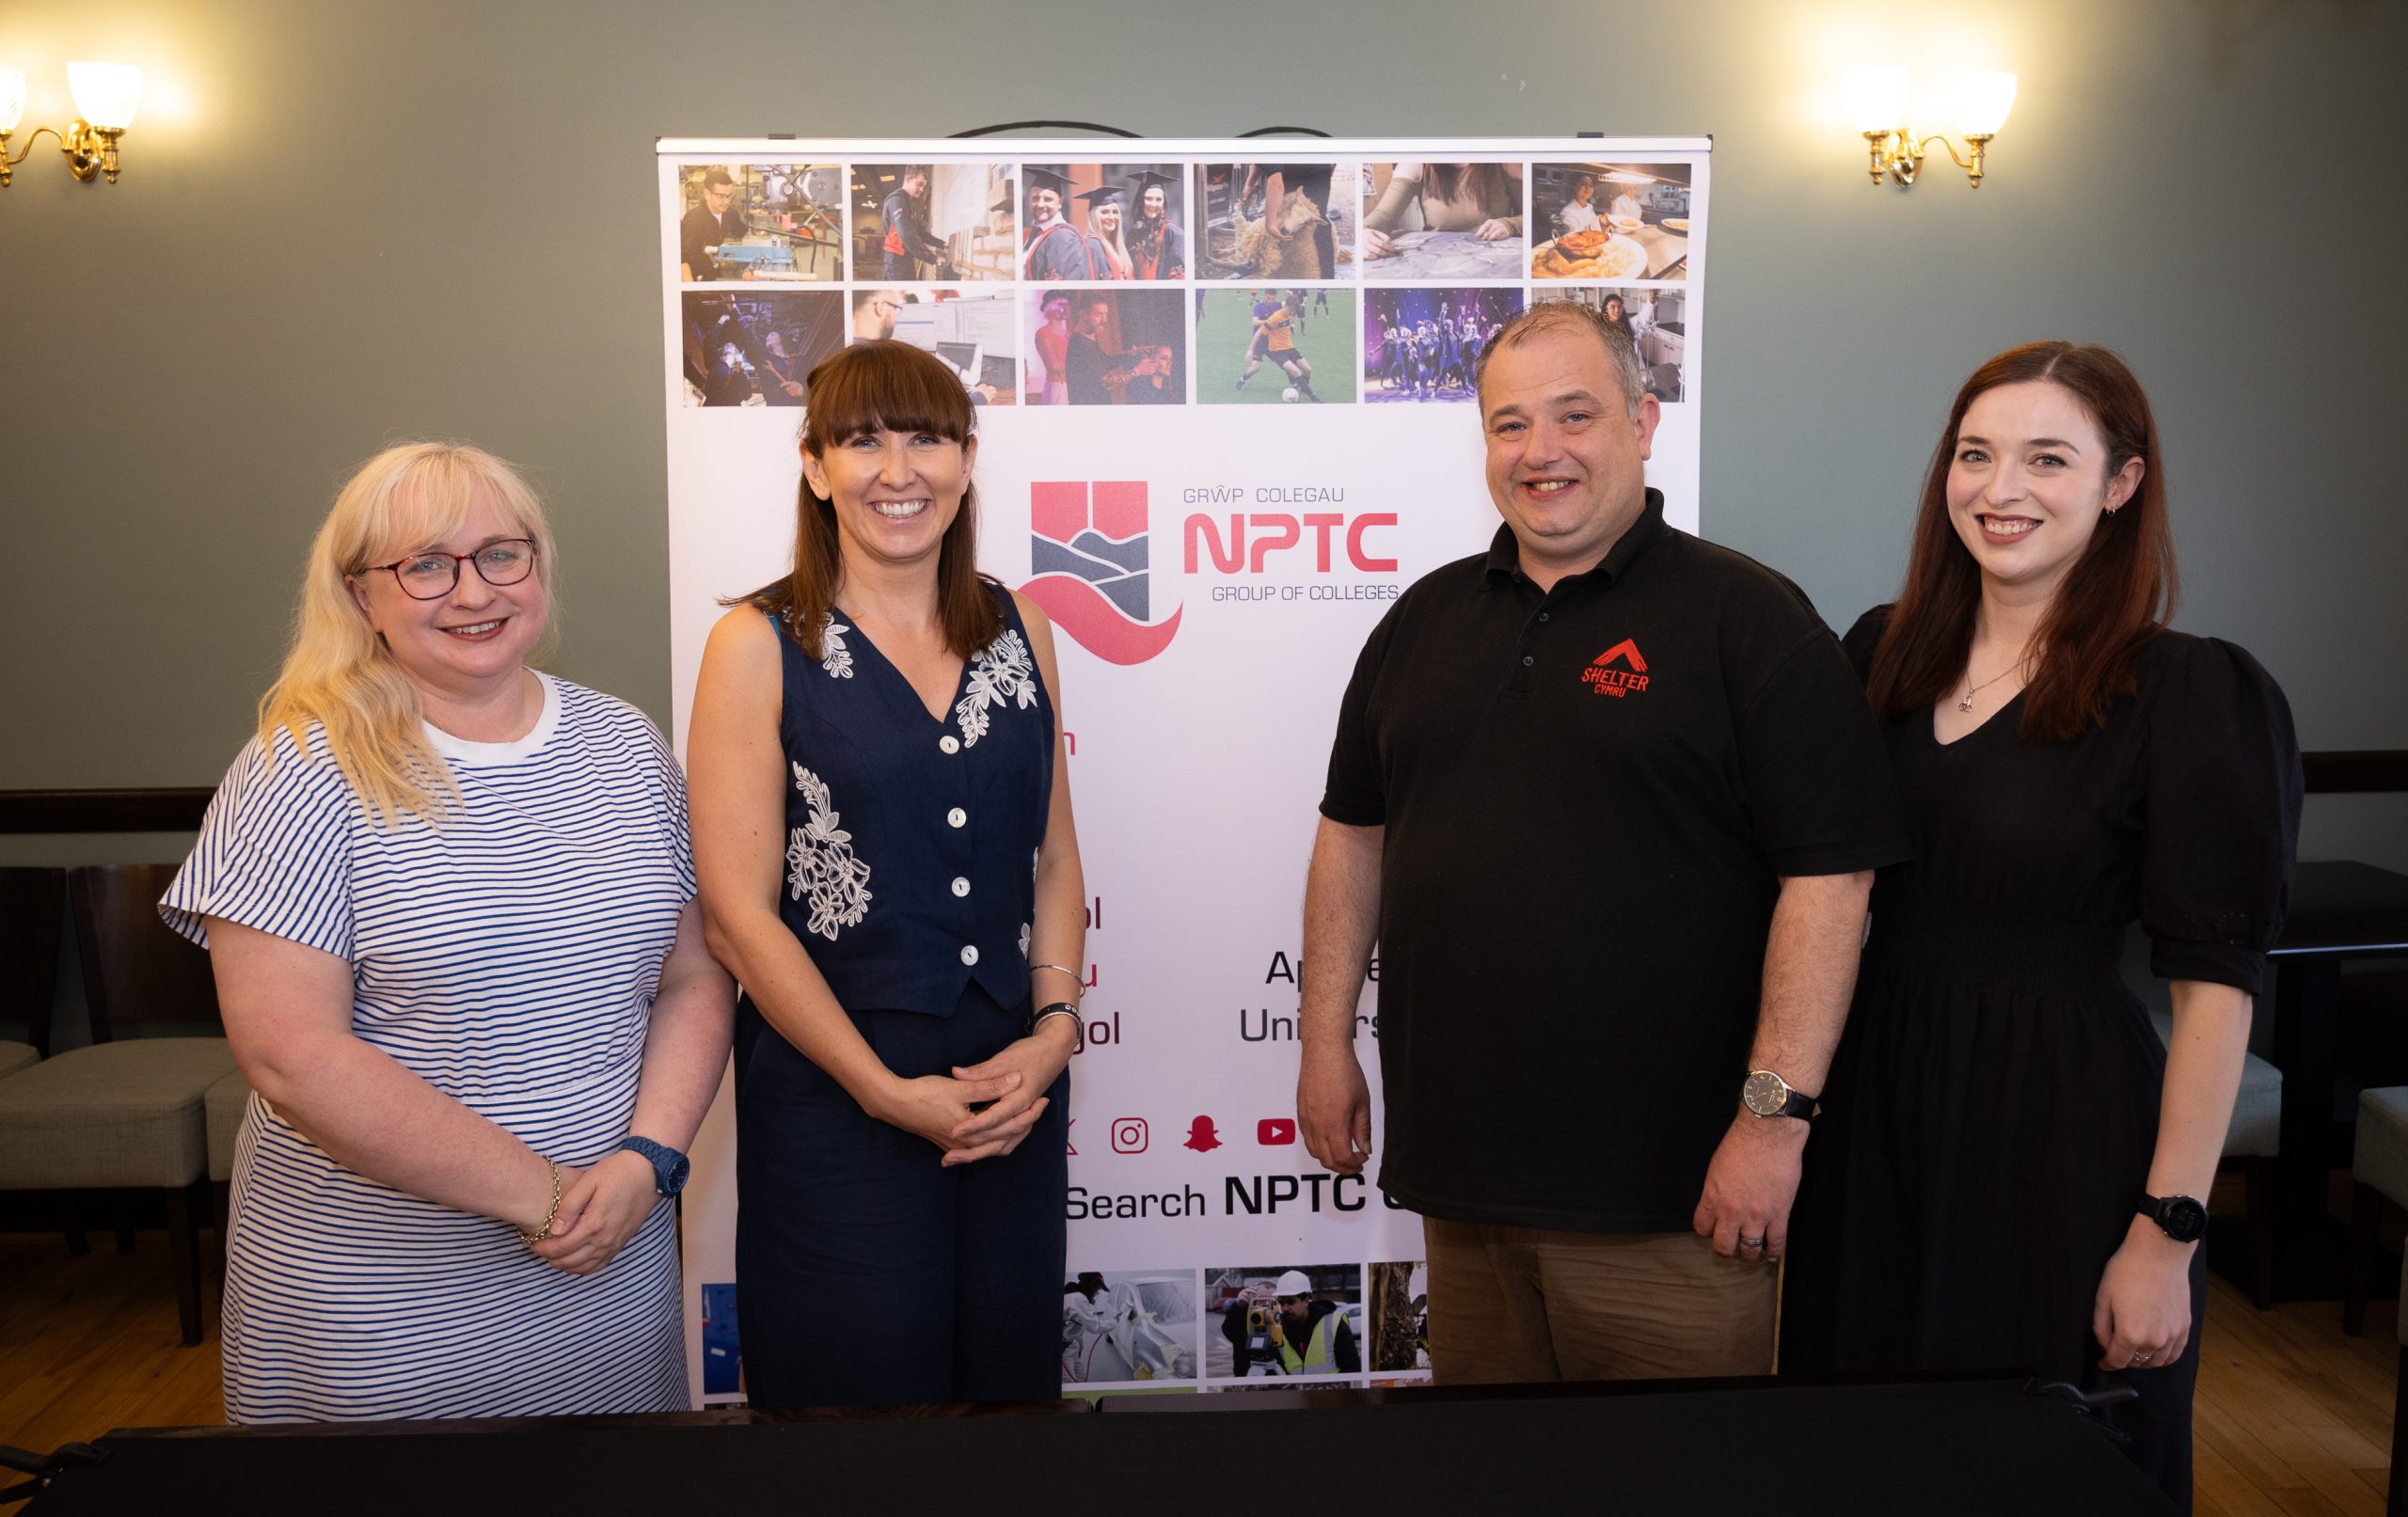 Catherine Lewis: Principal and Gemma Charnock: Vice Principal Corporate and Company Secretary from NPTC Group of Colleges, with Ava Plowright: Fundraising Manager and Neil Davies: Regional Fundraiser, South Wales, Shelter Cymru.